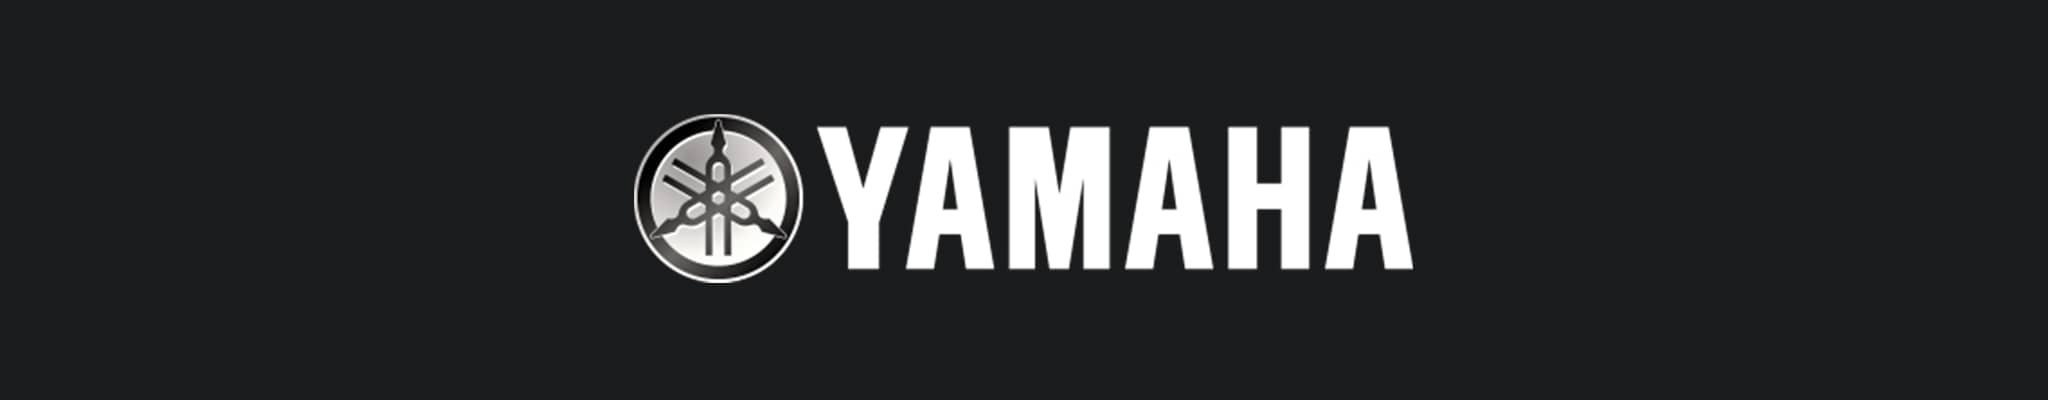 The Yamaha logo in white on a black background, featured alongside the text on the Perfex website.